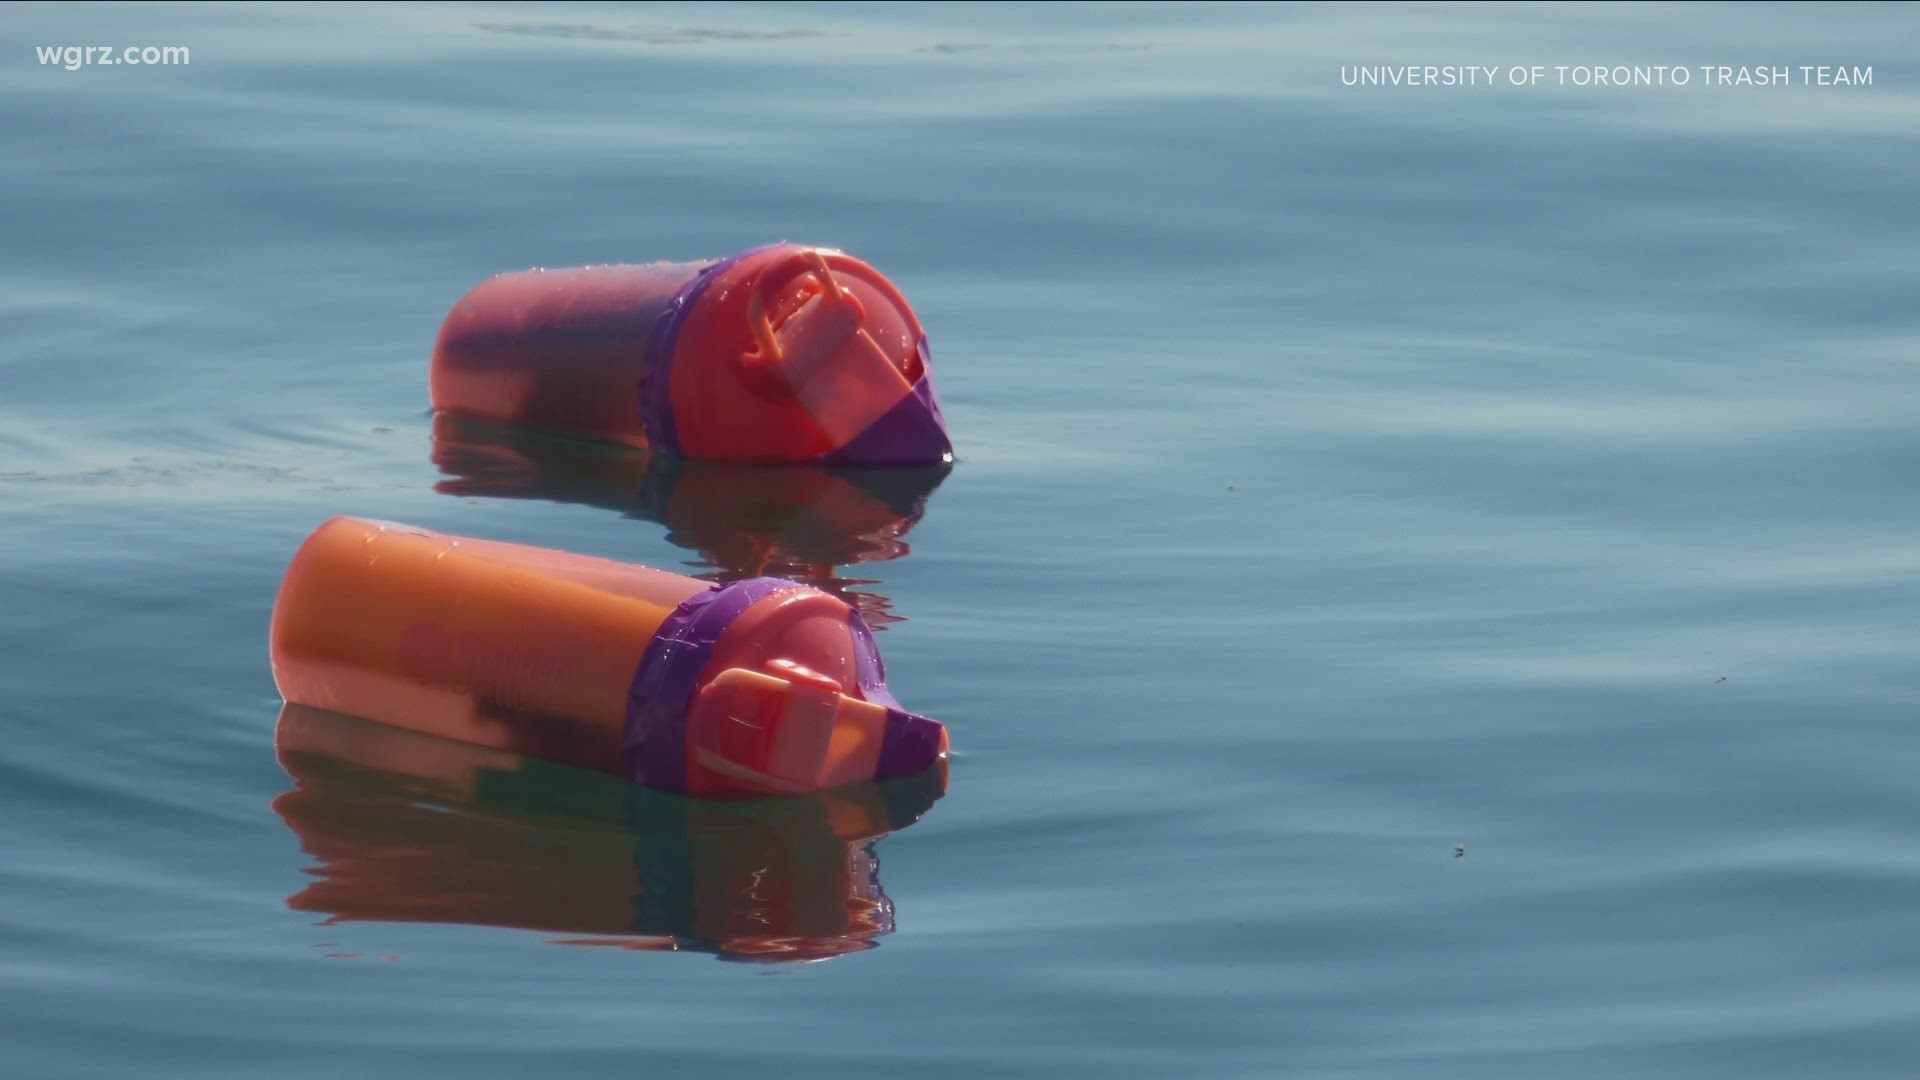 There's a project happening north of the border to track litter pollution in Lake Ontario.